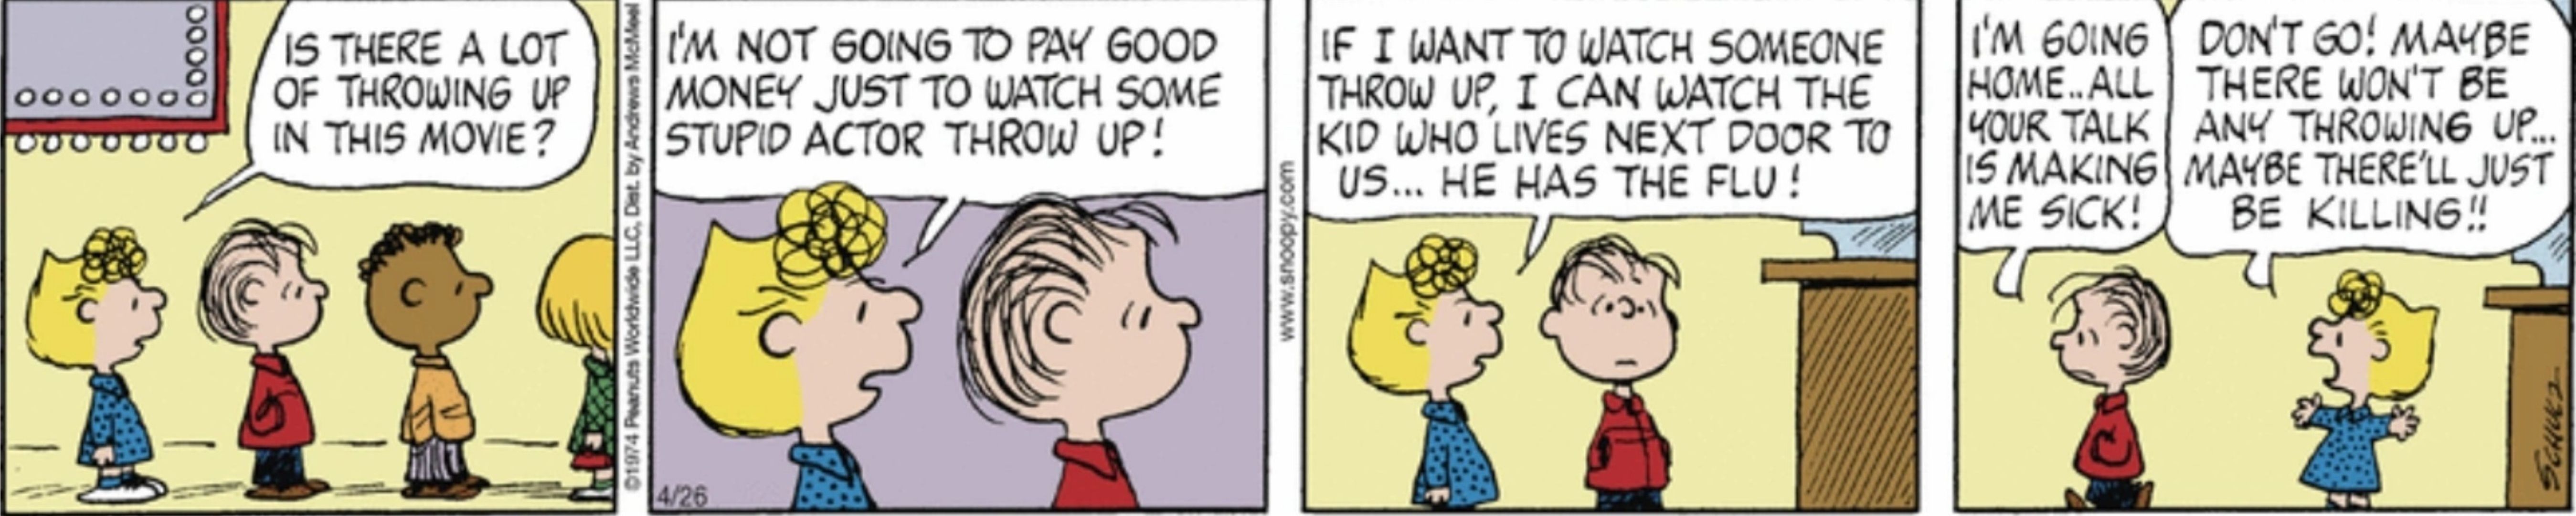 Sally and Linus in line in Peanuts.